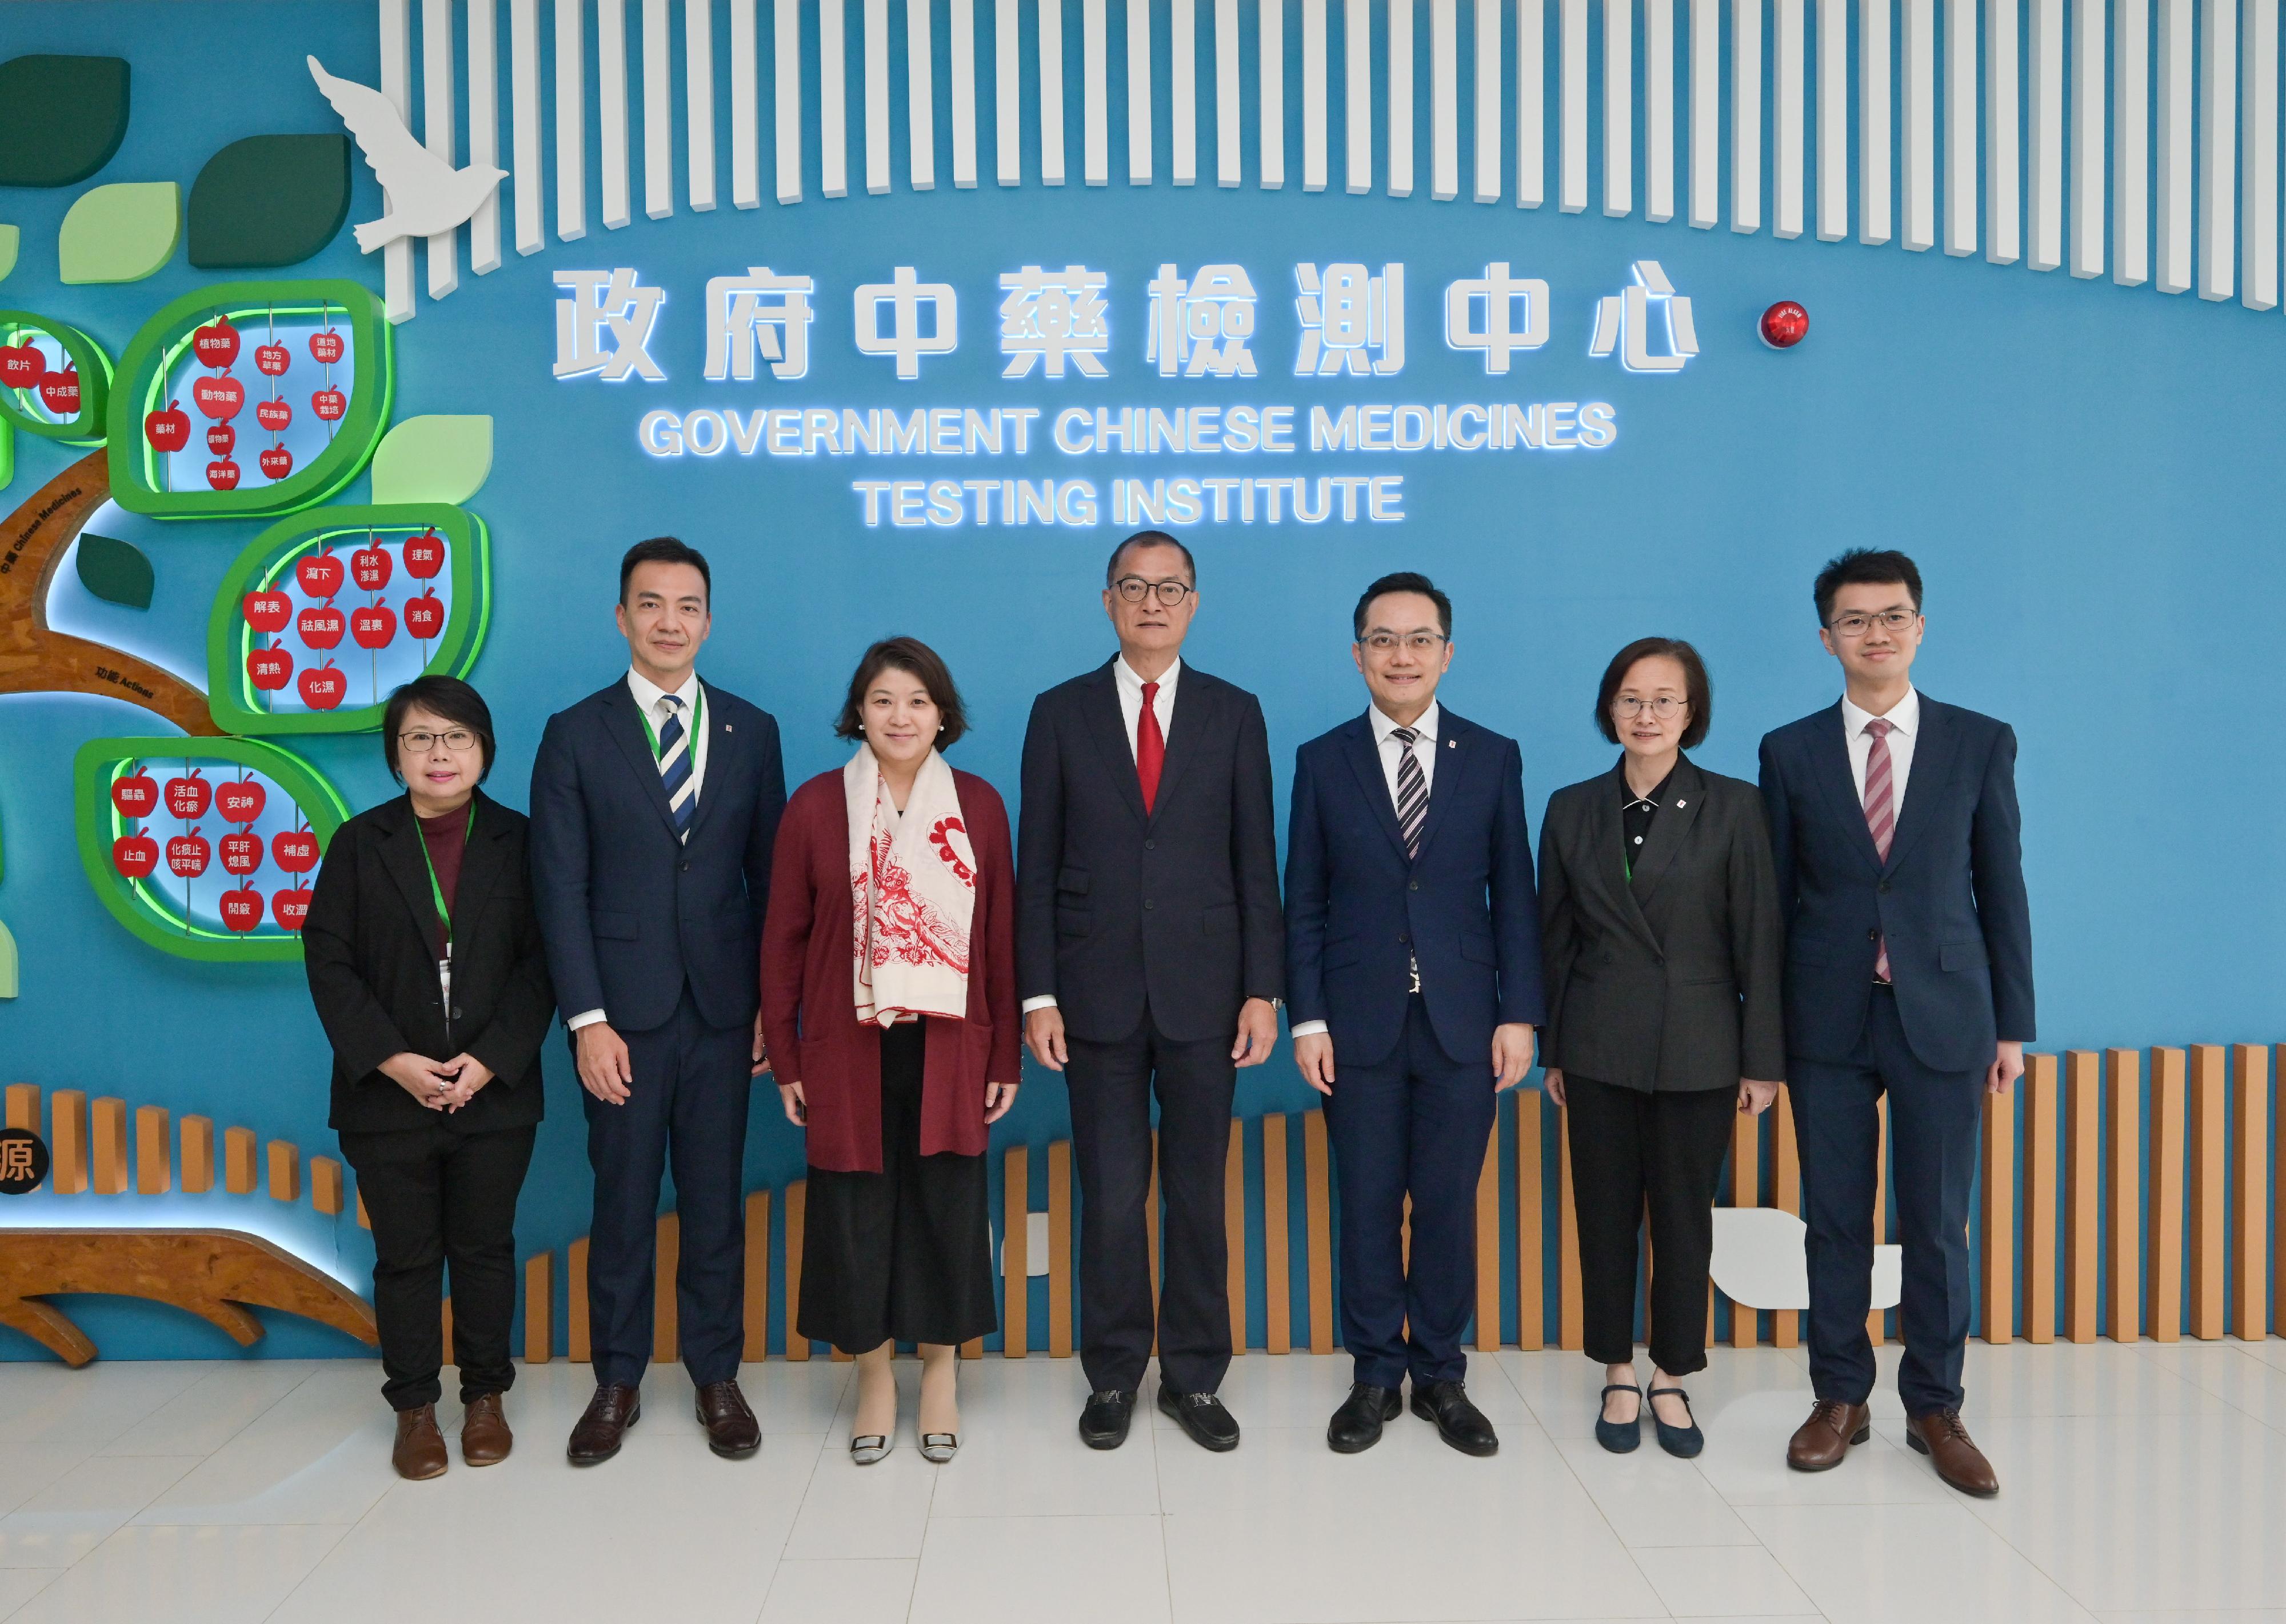 The Secretary for Health, Professor Lo Chung-mau, today (March 26) attended the launch ceremony of the Department of Health's new dedicated website Digital Herbarium for Chinese Medicines. Photo shows Professor Lo (centre); the Under Secretary for Health, Dr Libby Lee (third left) and the Director of Health, Dr Ronald Lam (third right) after visiting the Government Chinese Medicines Testing Institute of the Department of Health, which is located in Hong Kong Science Park.